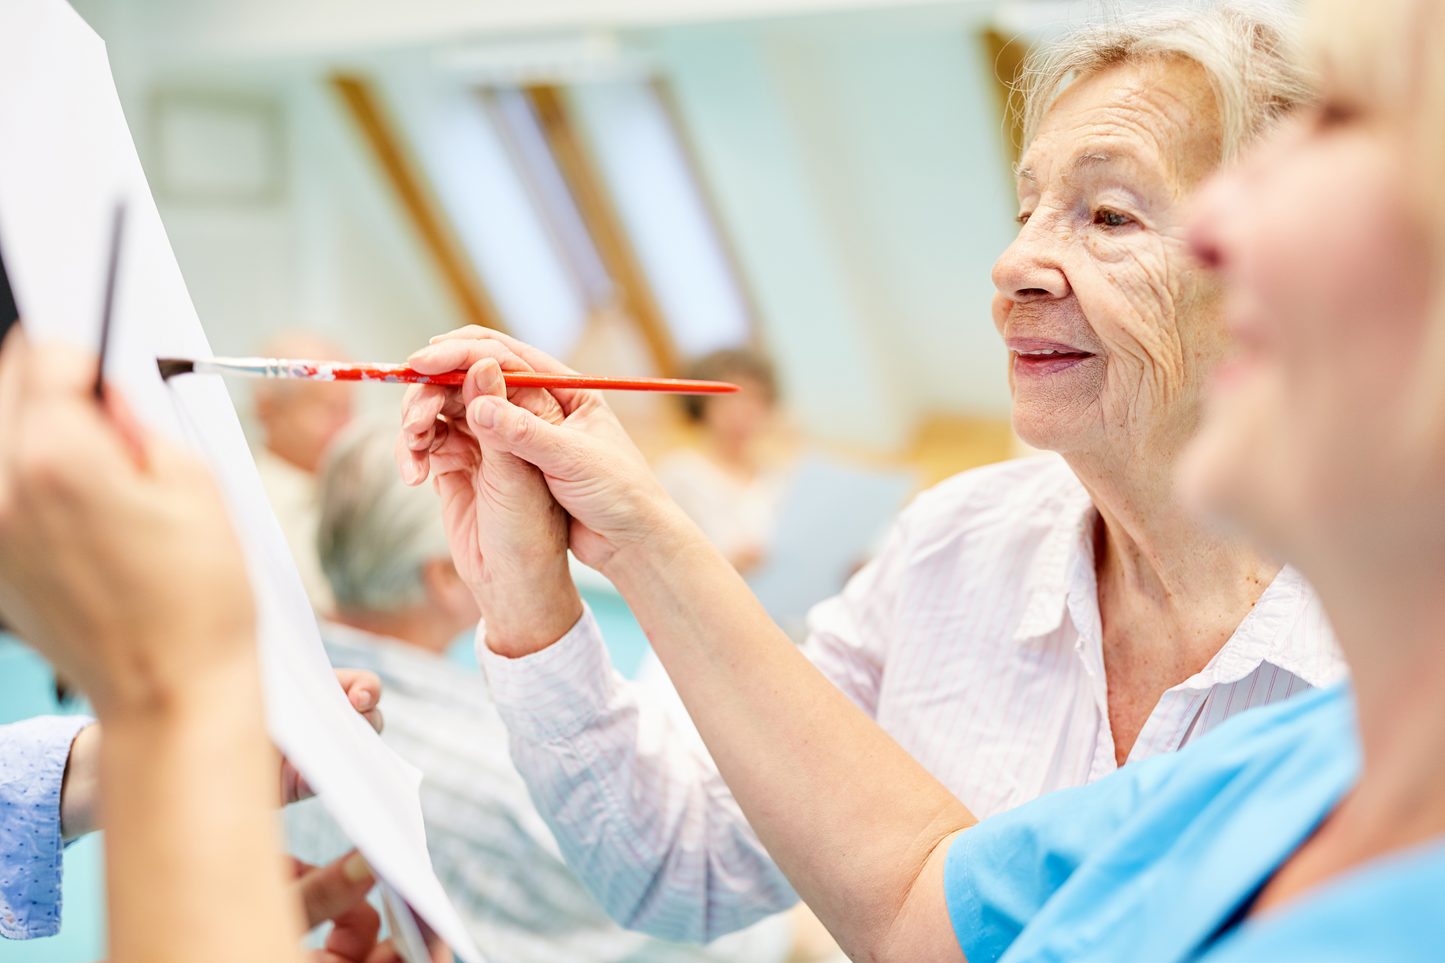 Creative Art as Therapy and Wellbeing - Aged Care